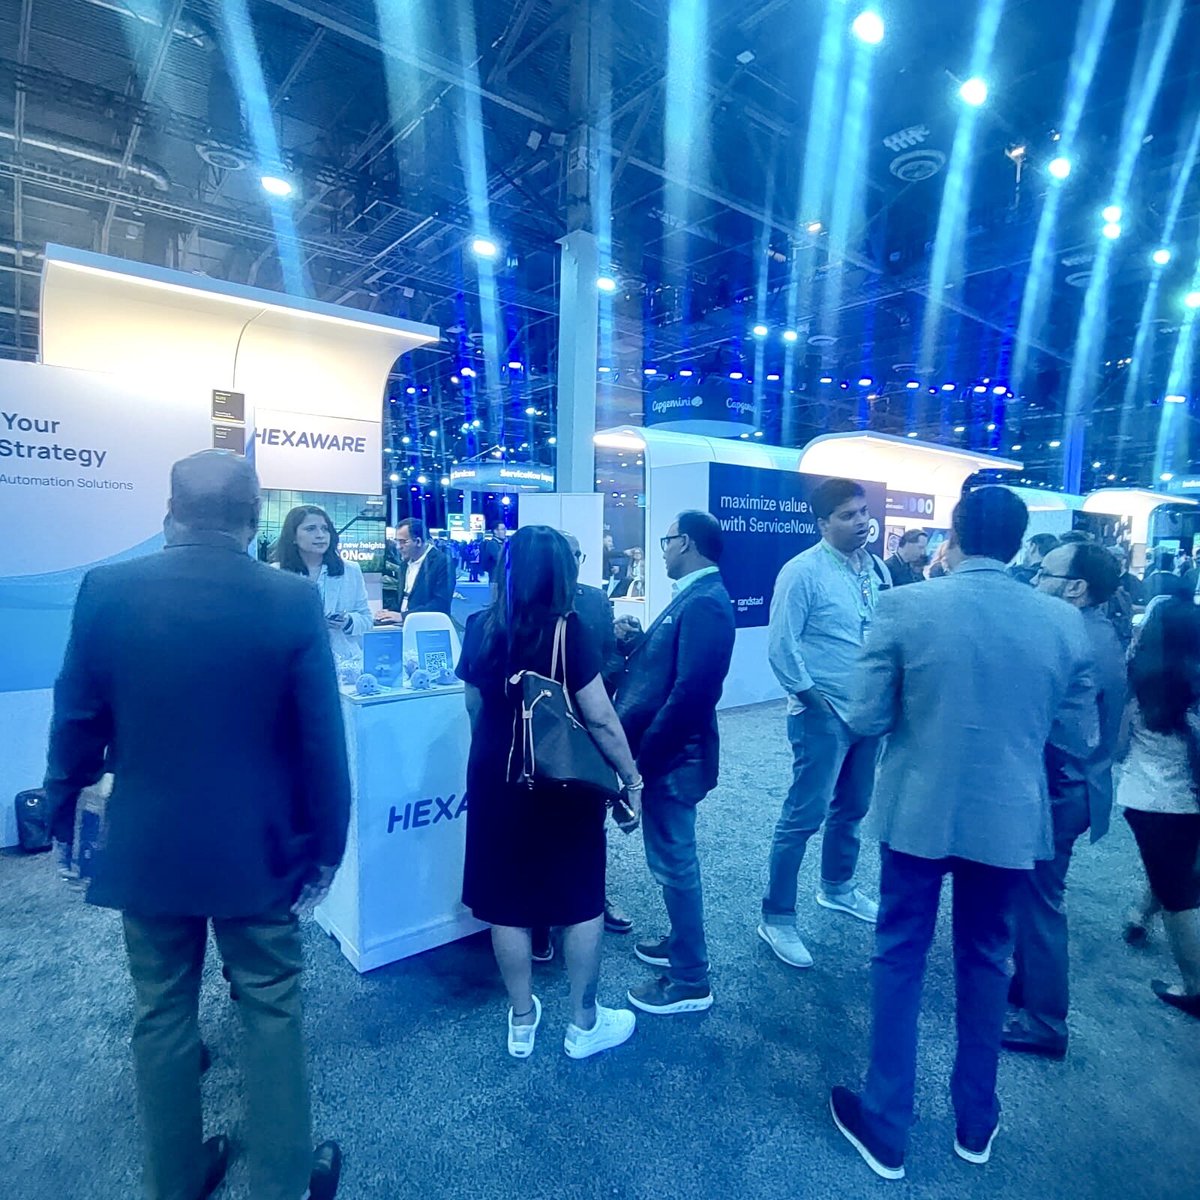 Day 2 at #ServiceNow Knowledge 2024: insightful discussions & chances to win Hexaware goodies. Shoutout to booth #5448 visitors for lively interactions today. Drop by for a chance to win & learn about transformative solutions that drive business forward. Don't miss out! #Know24